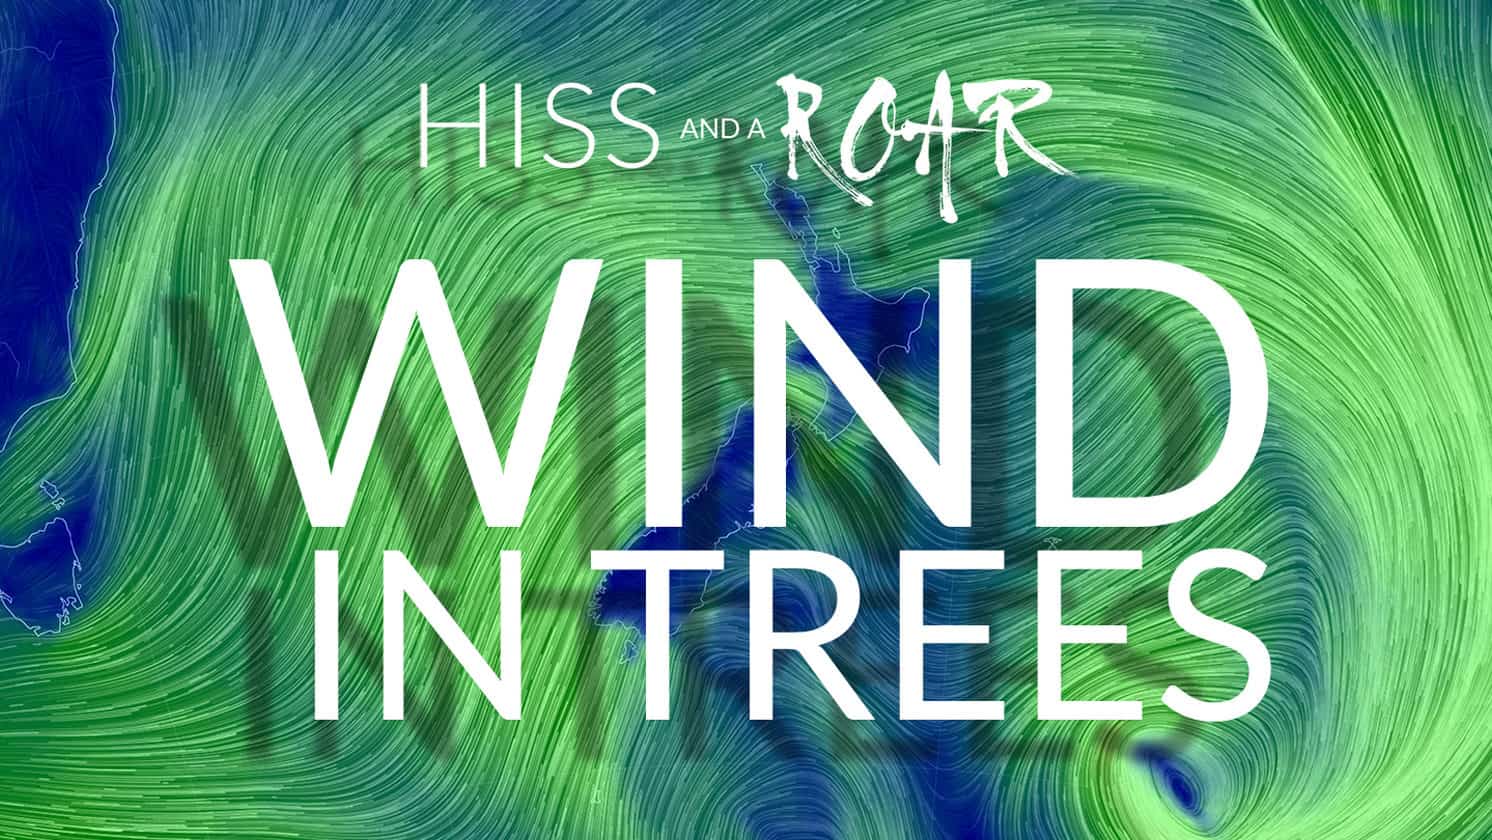 WIND IN TREES a New HISSandaROAR Library capturing the Wind Rising and the Forest Singing